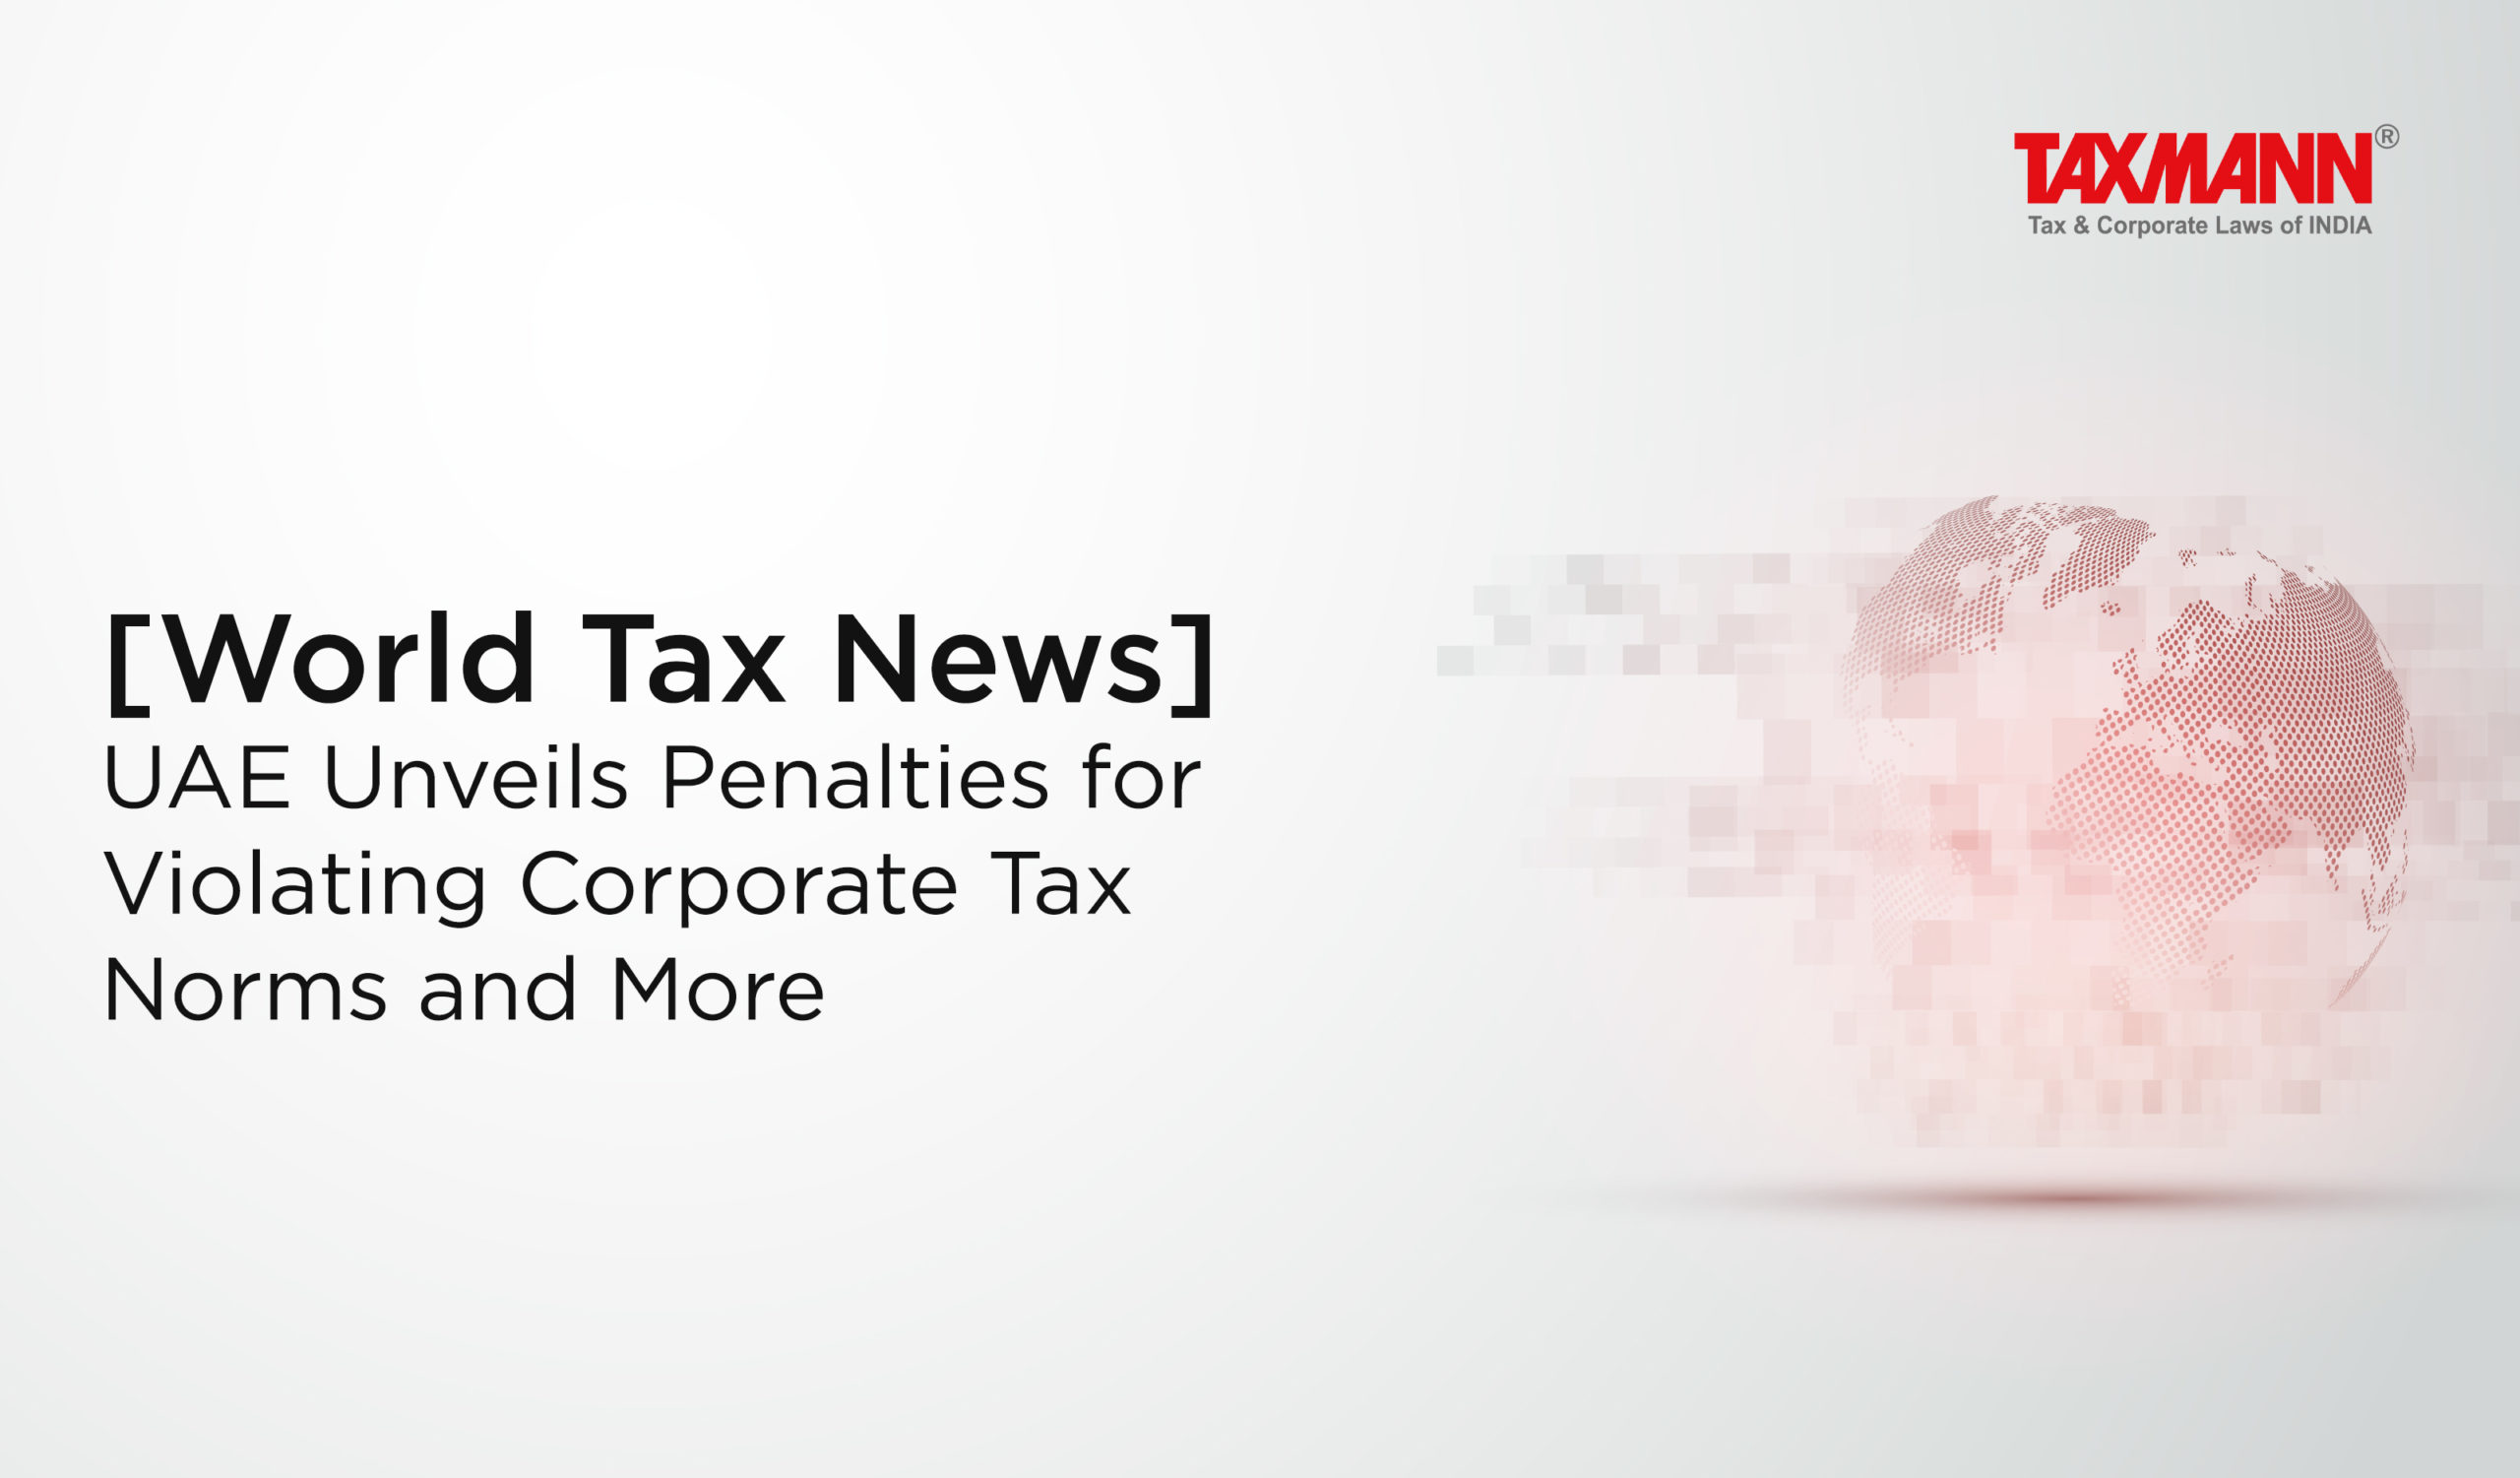 UAE Penalty for Violating Corporate Tax Norms